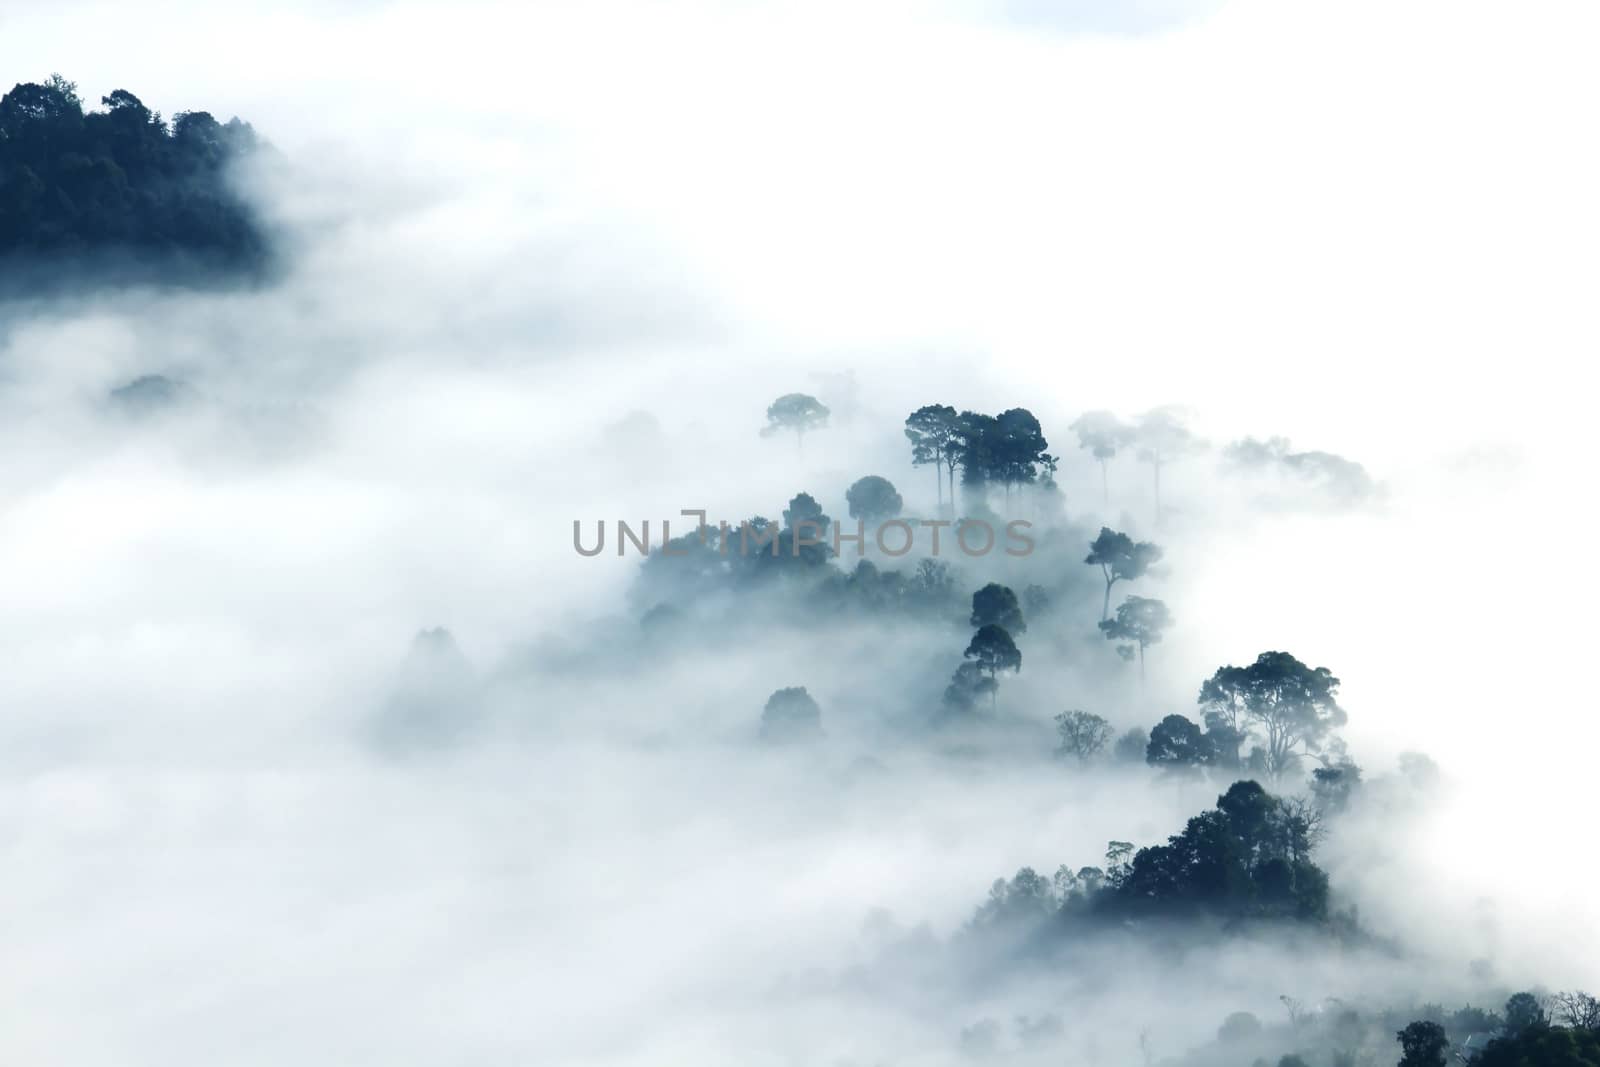 The fog covered the dense forest below, with abundant trees.